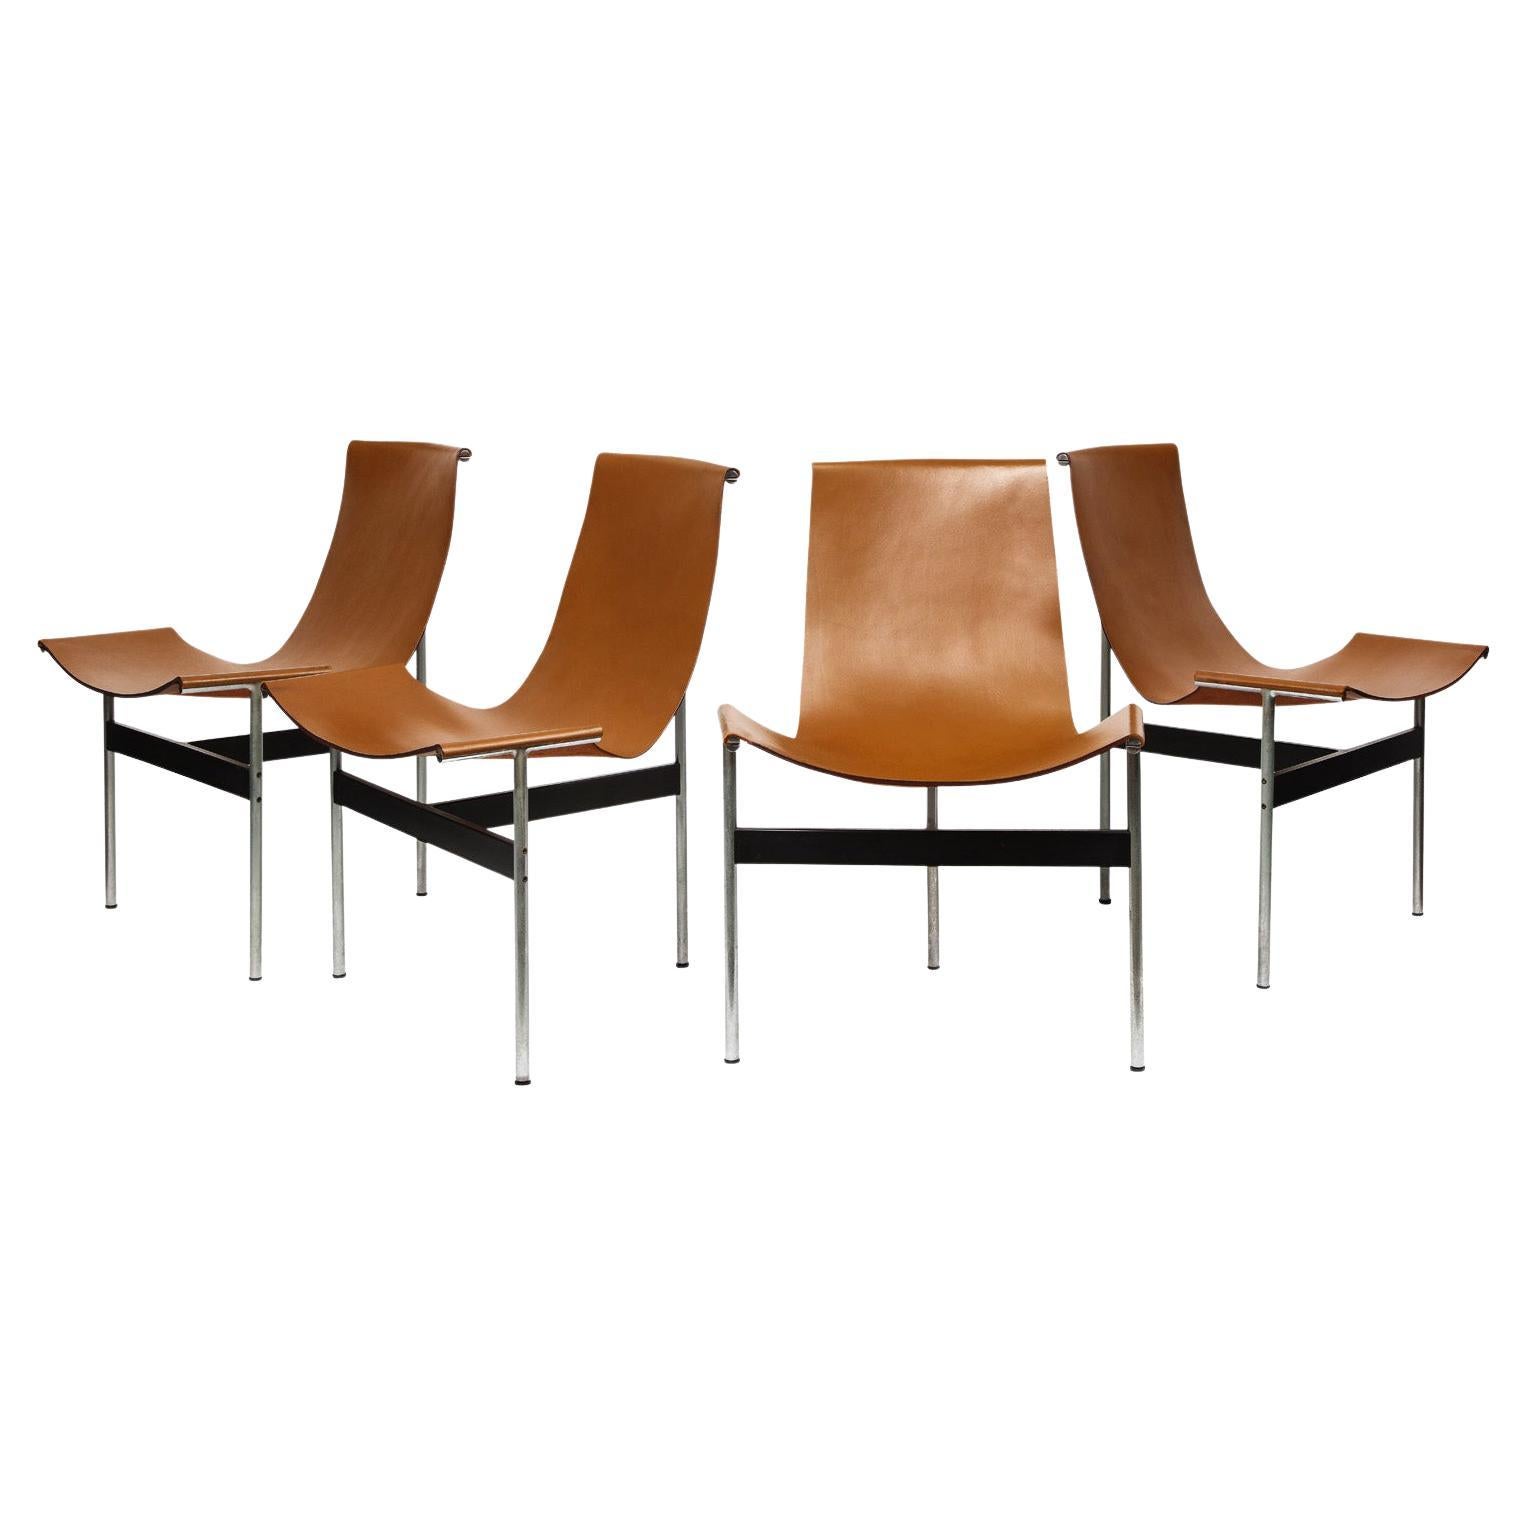 Laverne Set of Four "T Chairs" in Stainless Steel and Brown Leather, 1950s